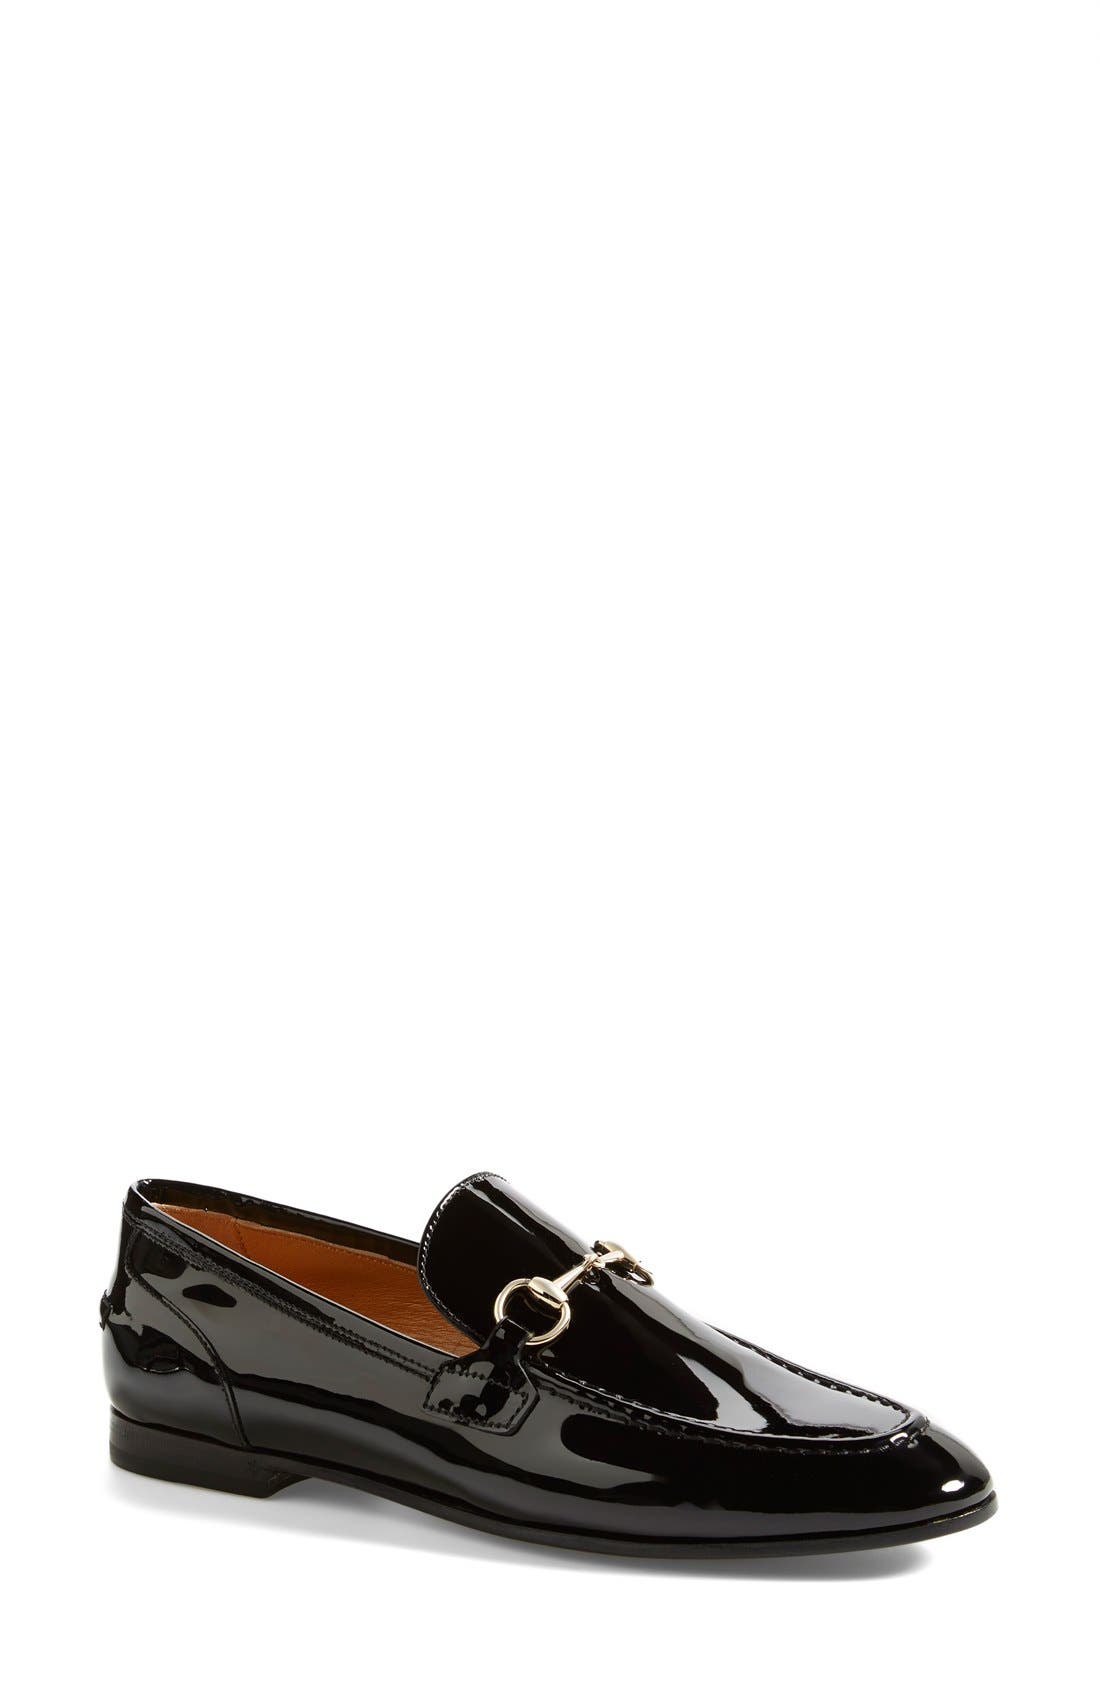 Gucci 'New Power' Patent Leather Loafer 